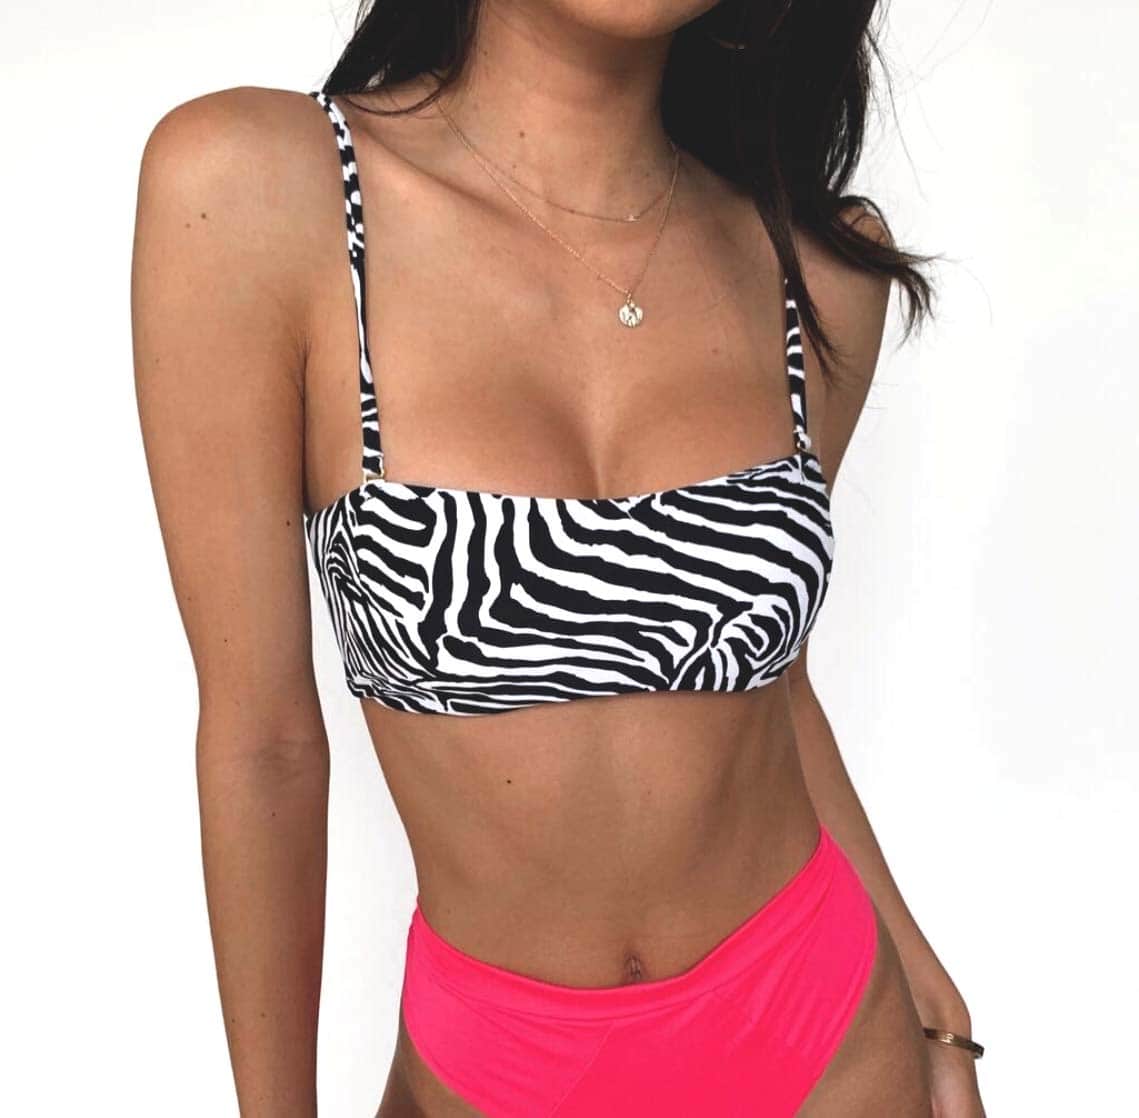 Top 10 So Hot Swimsuit Trends Of Summer 2019